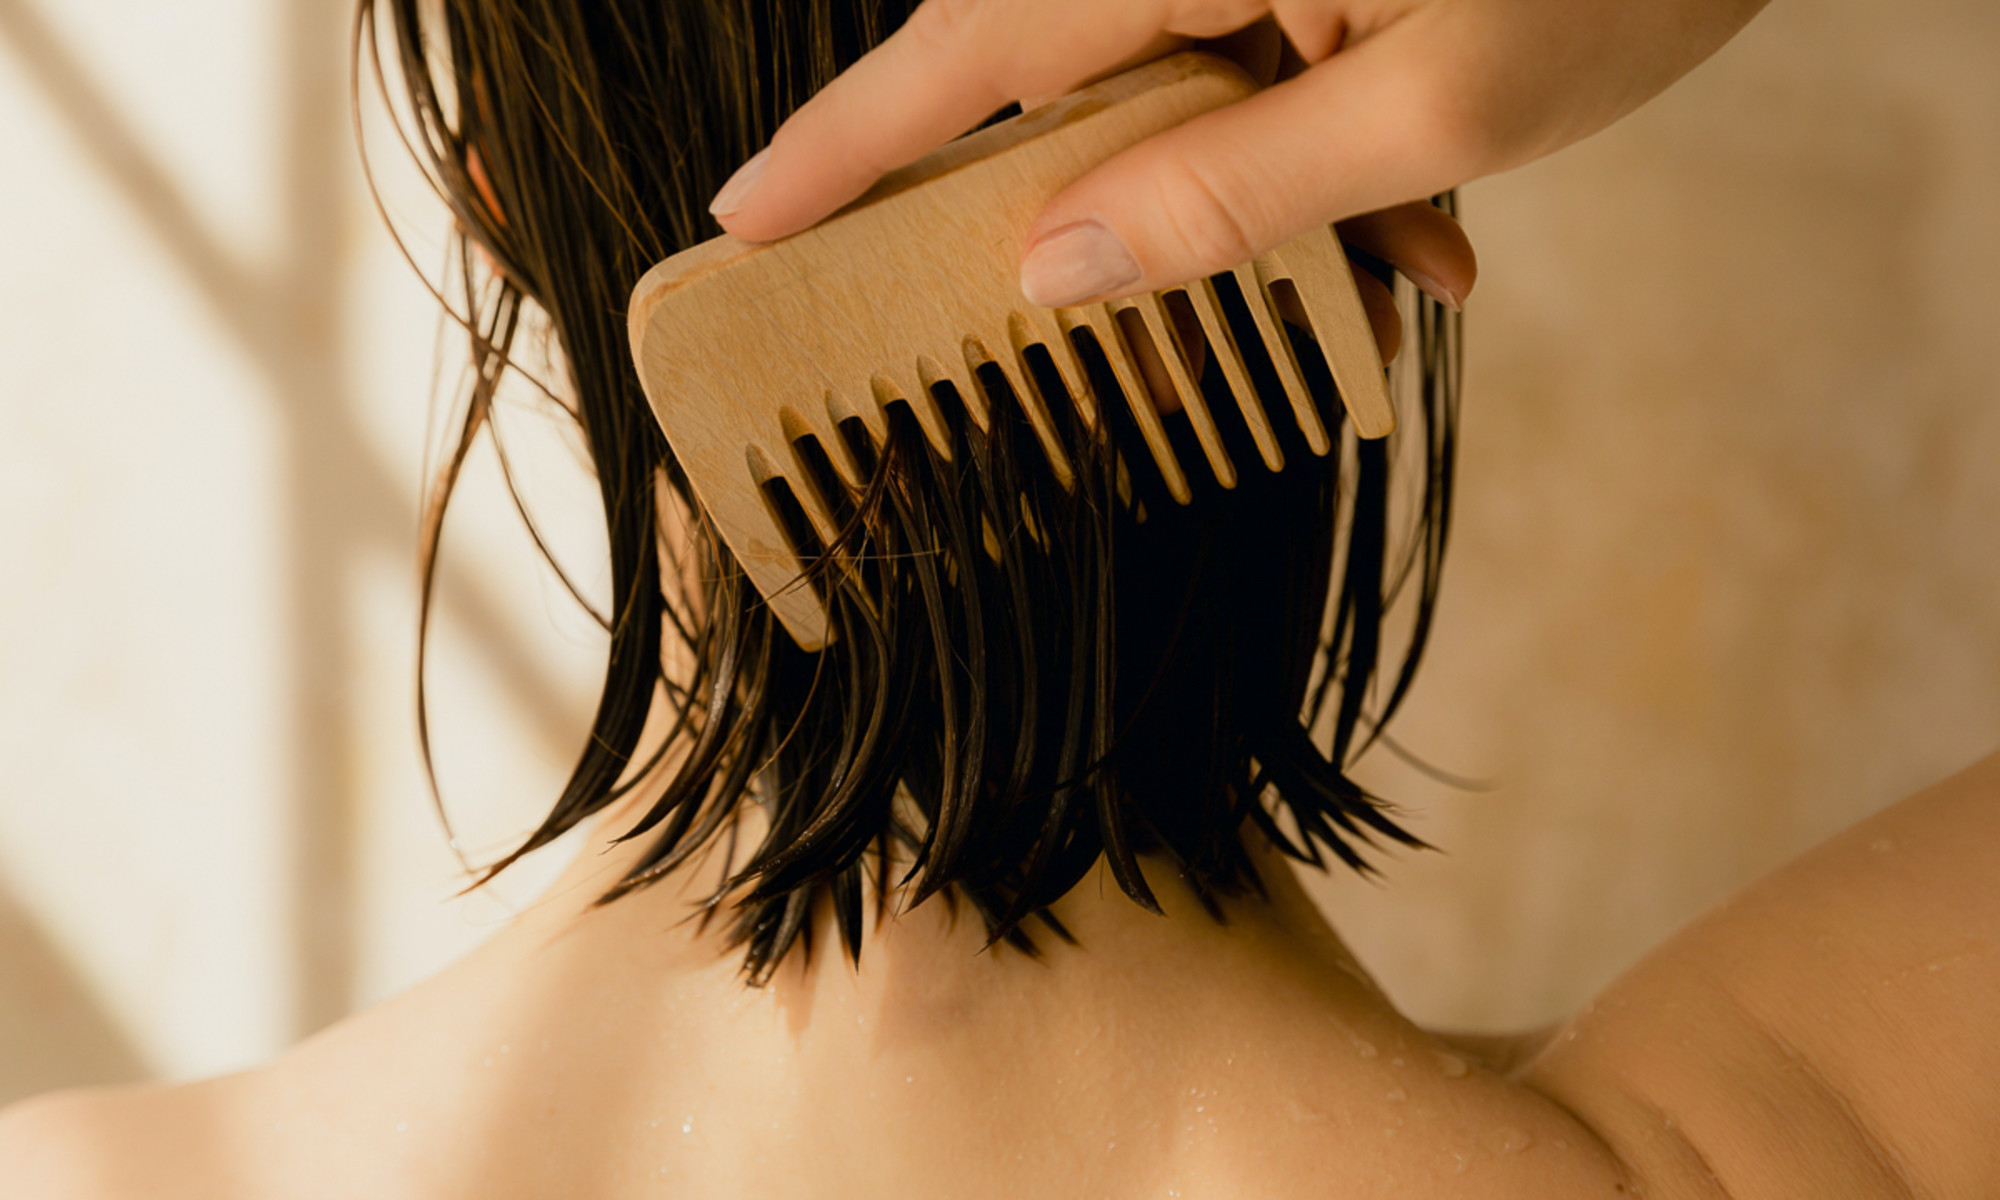 Does Combing Help Hair Growth